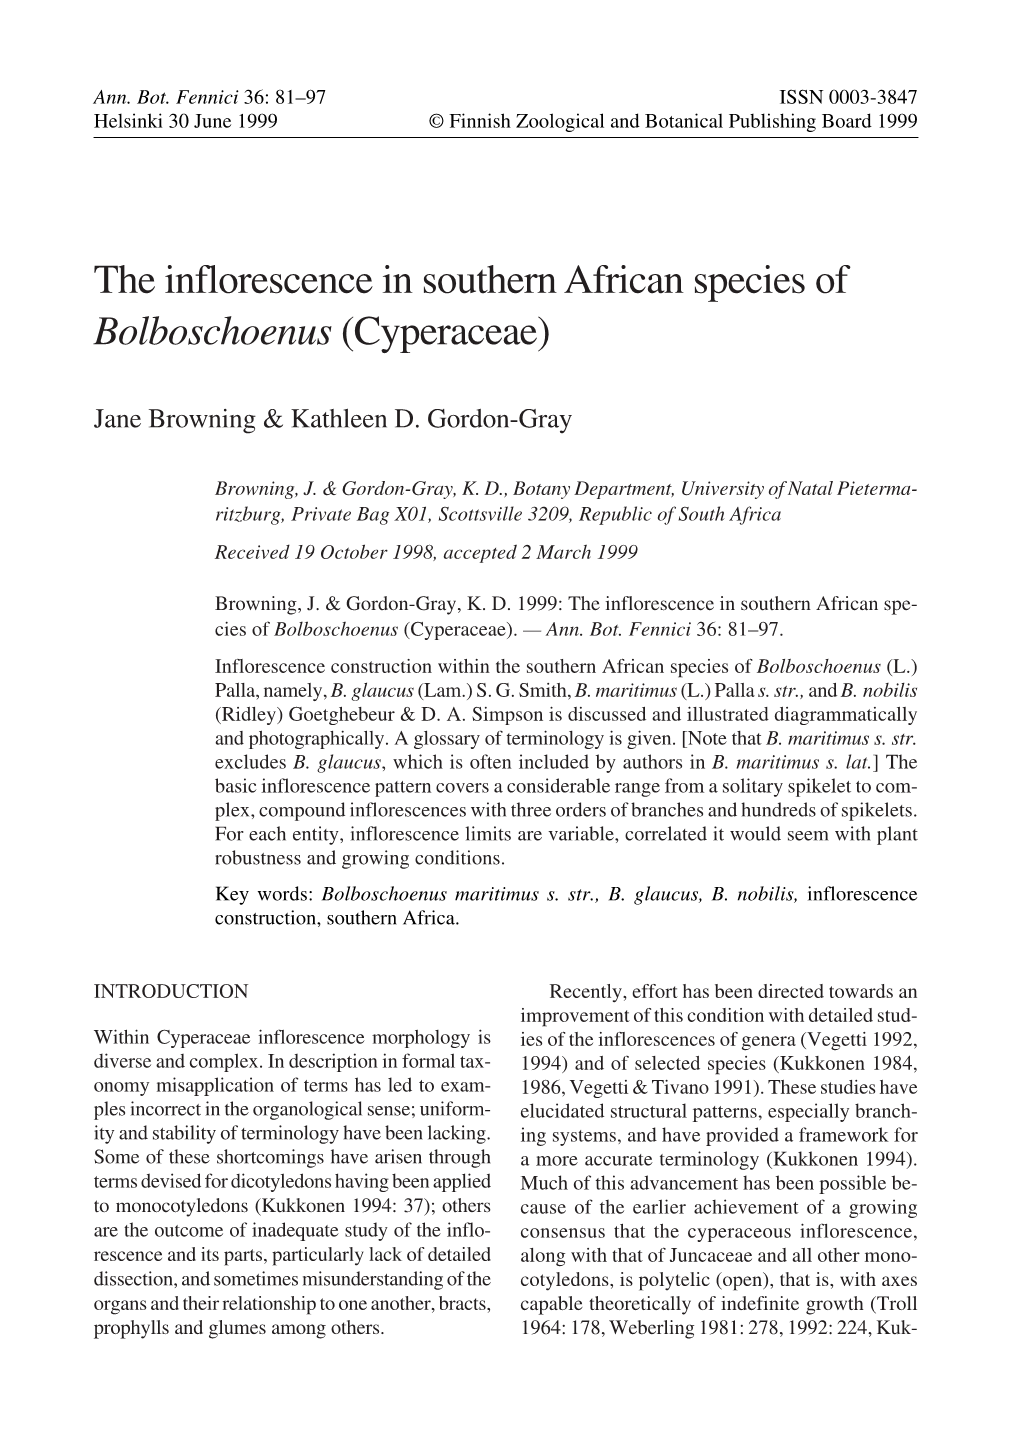 The Inflorescence in Southern African Species of Bolboschoenus (Cyperaceae)